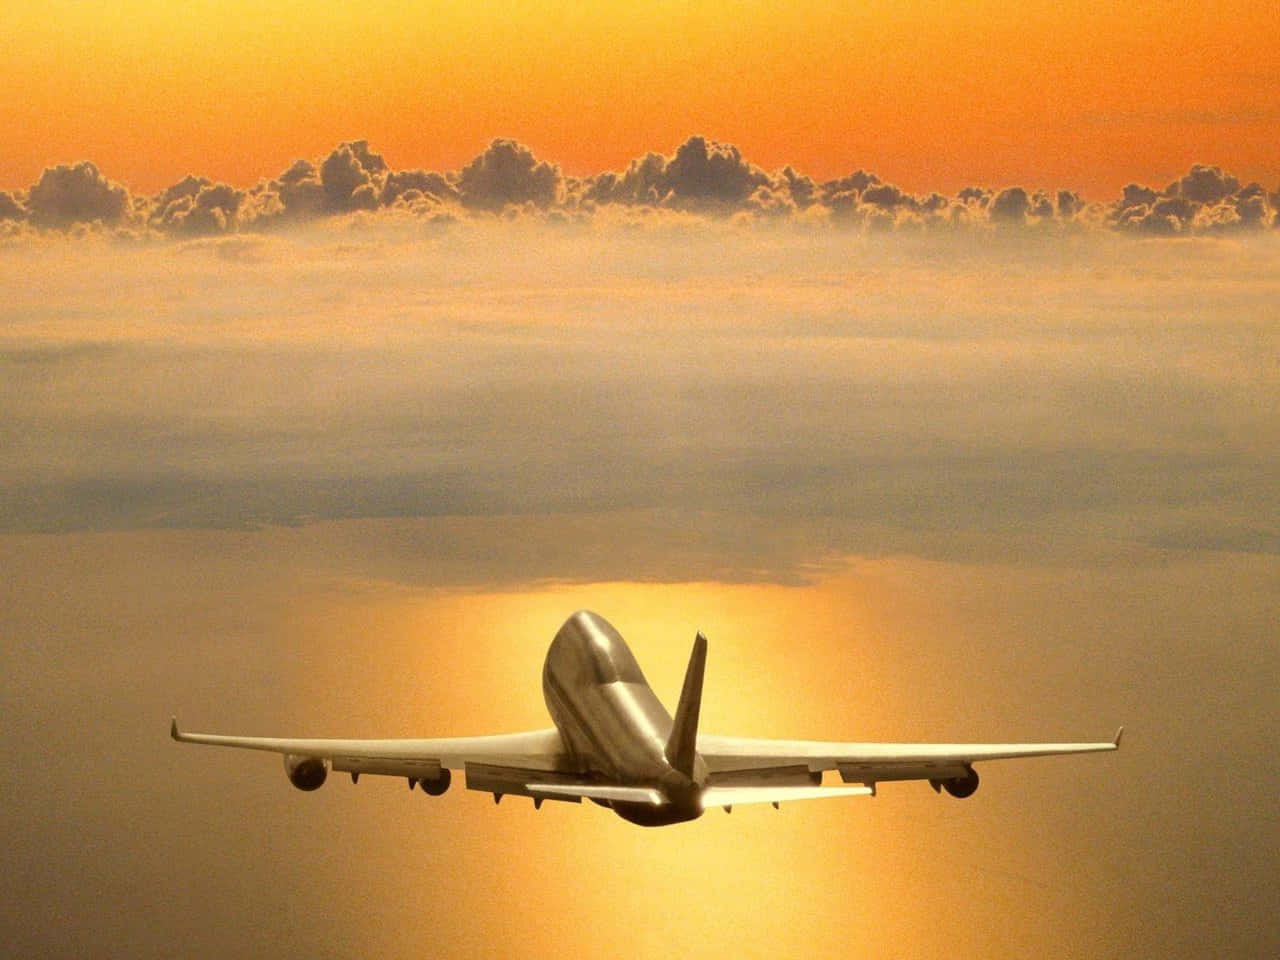 Best Plane Background Airplane Approaching The Clouds Background